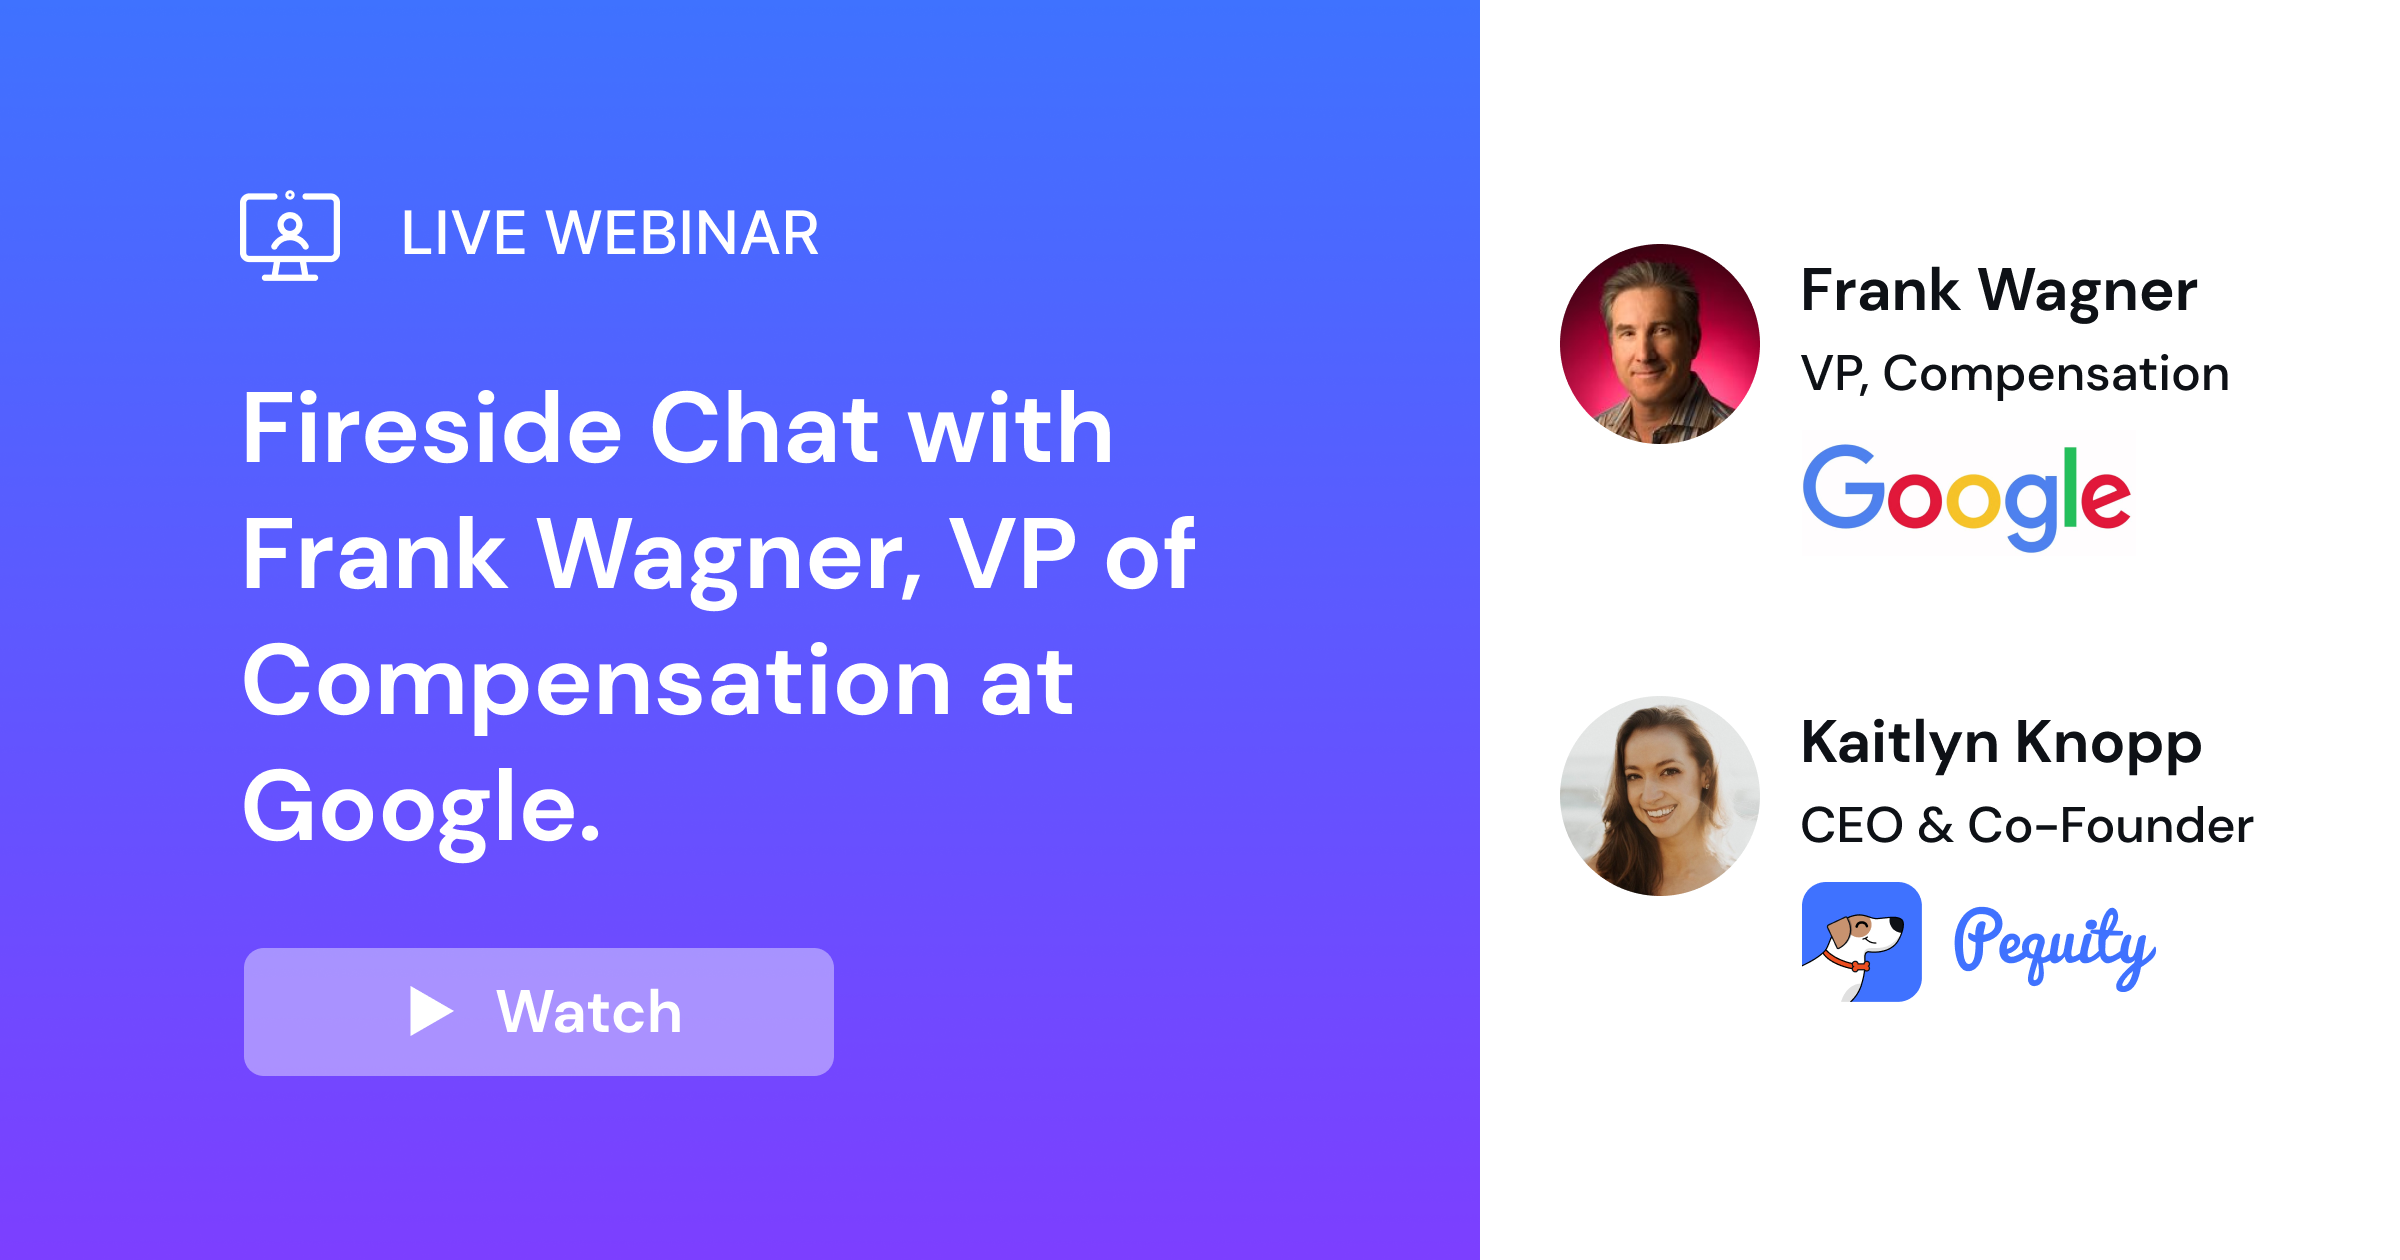 Fireside chat with Frank Wagener, VP of Compensation at Google